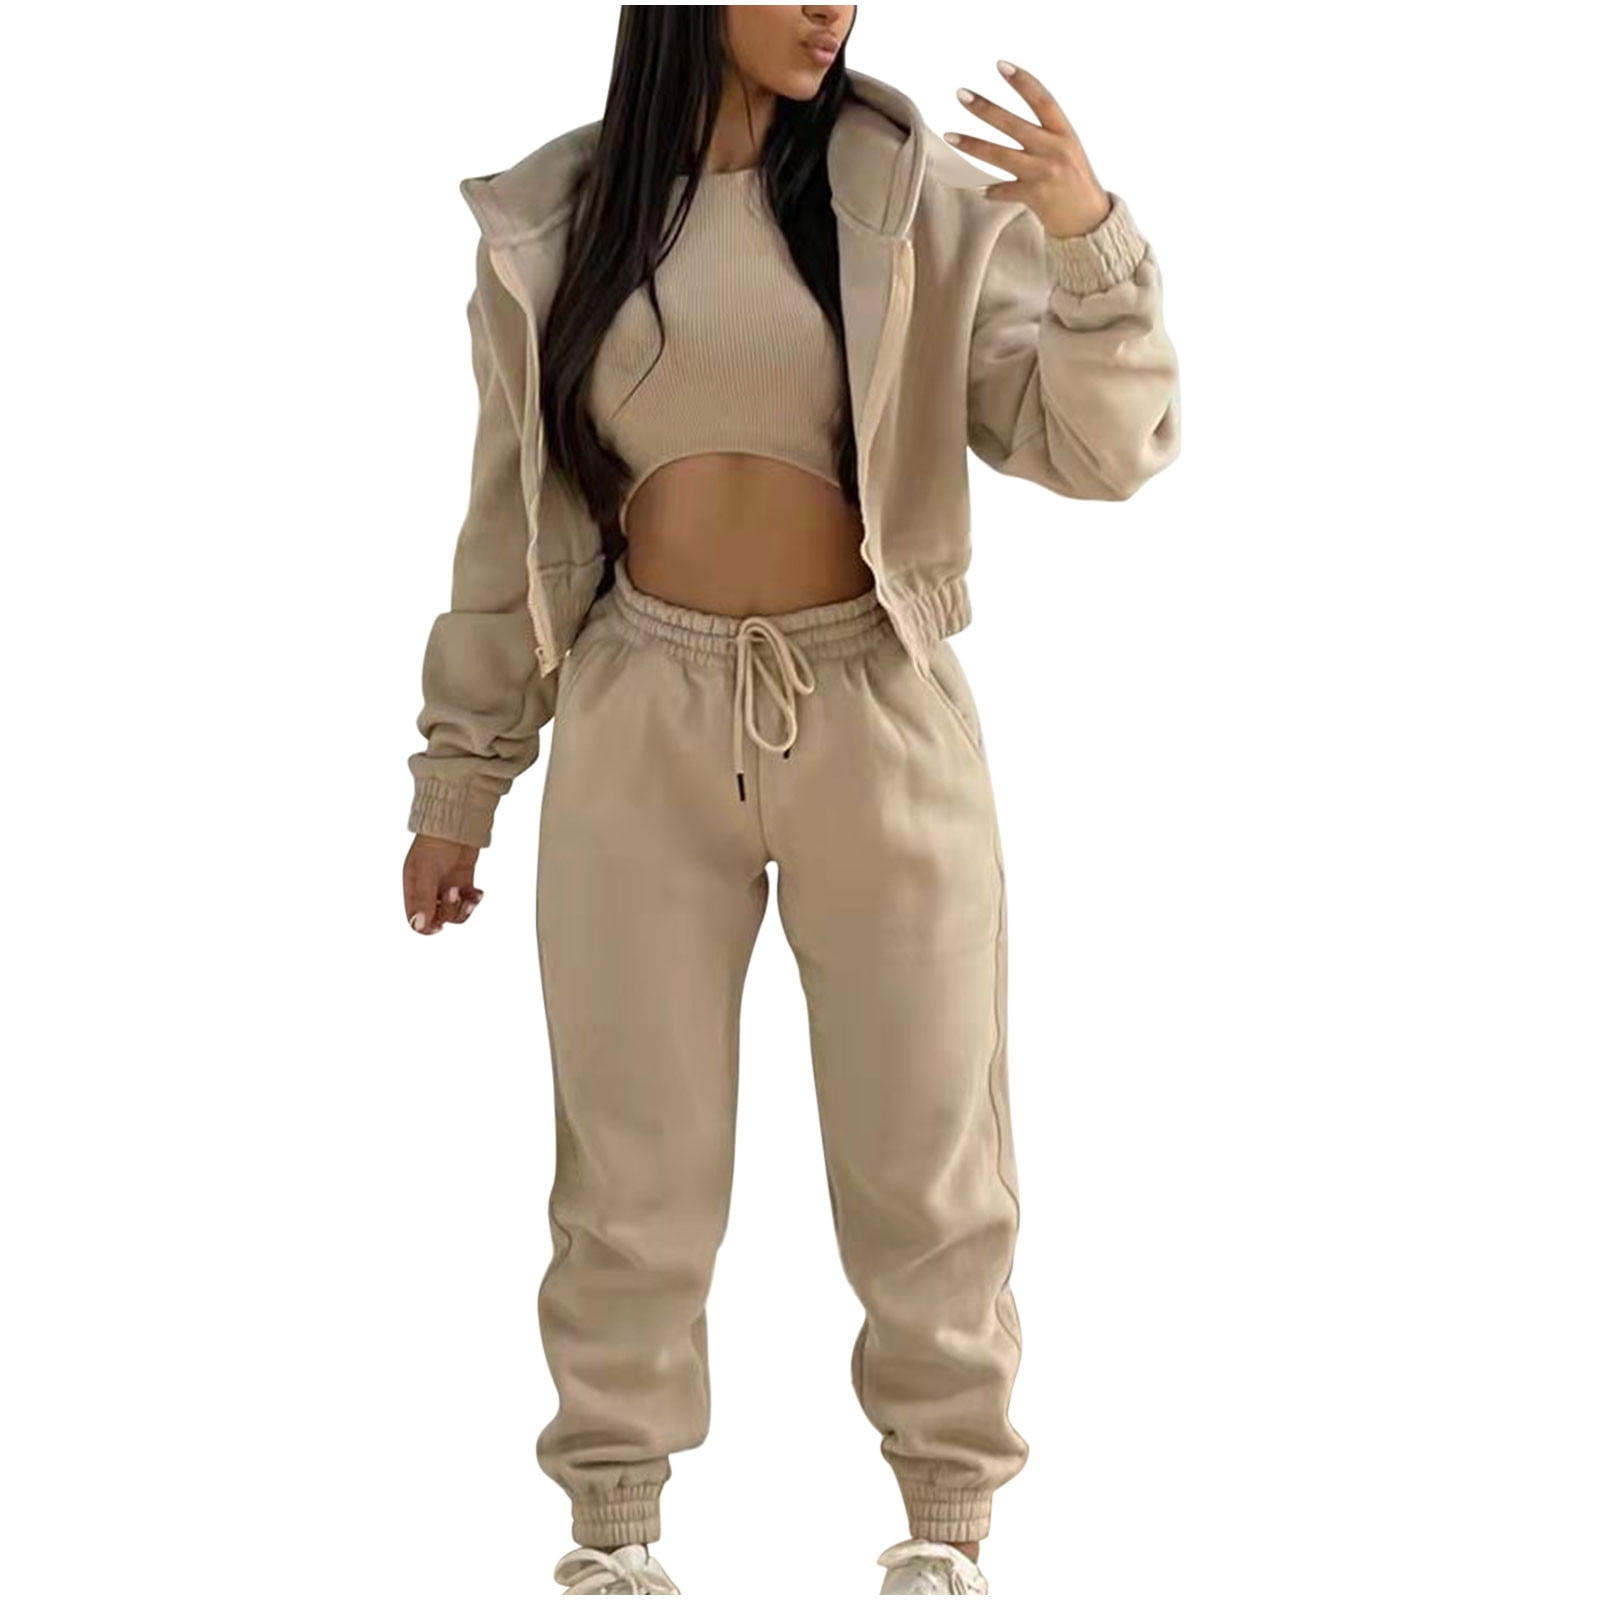 Winter Three Piece Set Womens Outfit Tracksuit Zip Hoodies+ High